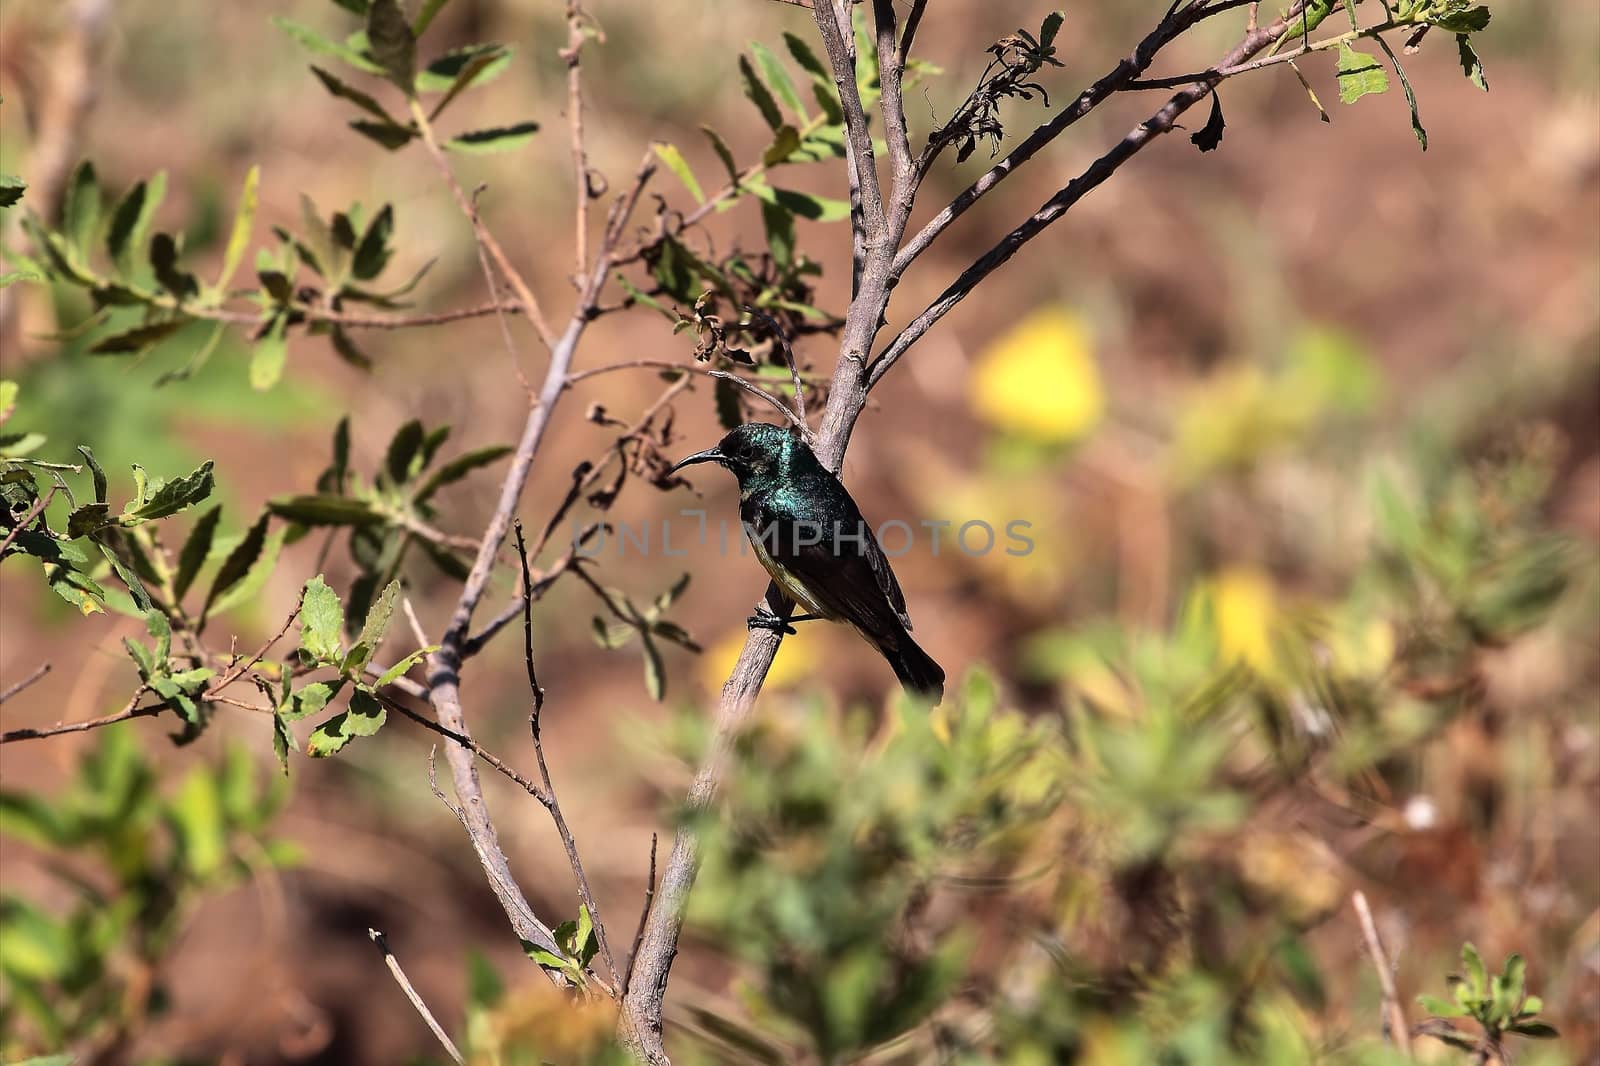 Variable Sunbird in Ethiopia by CWeiss